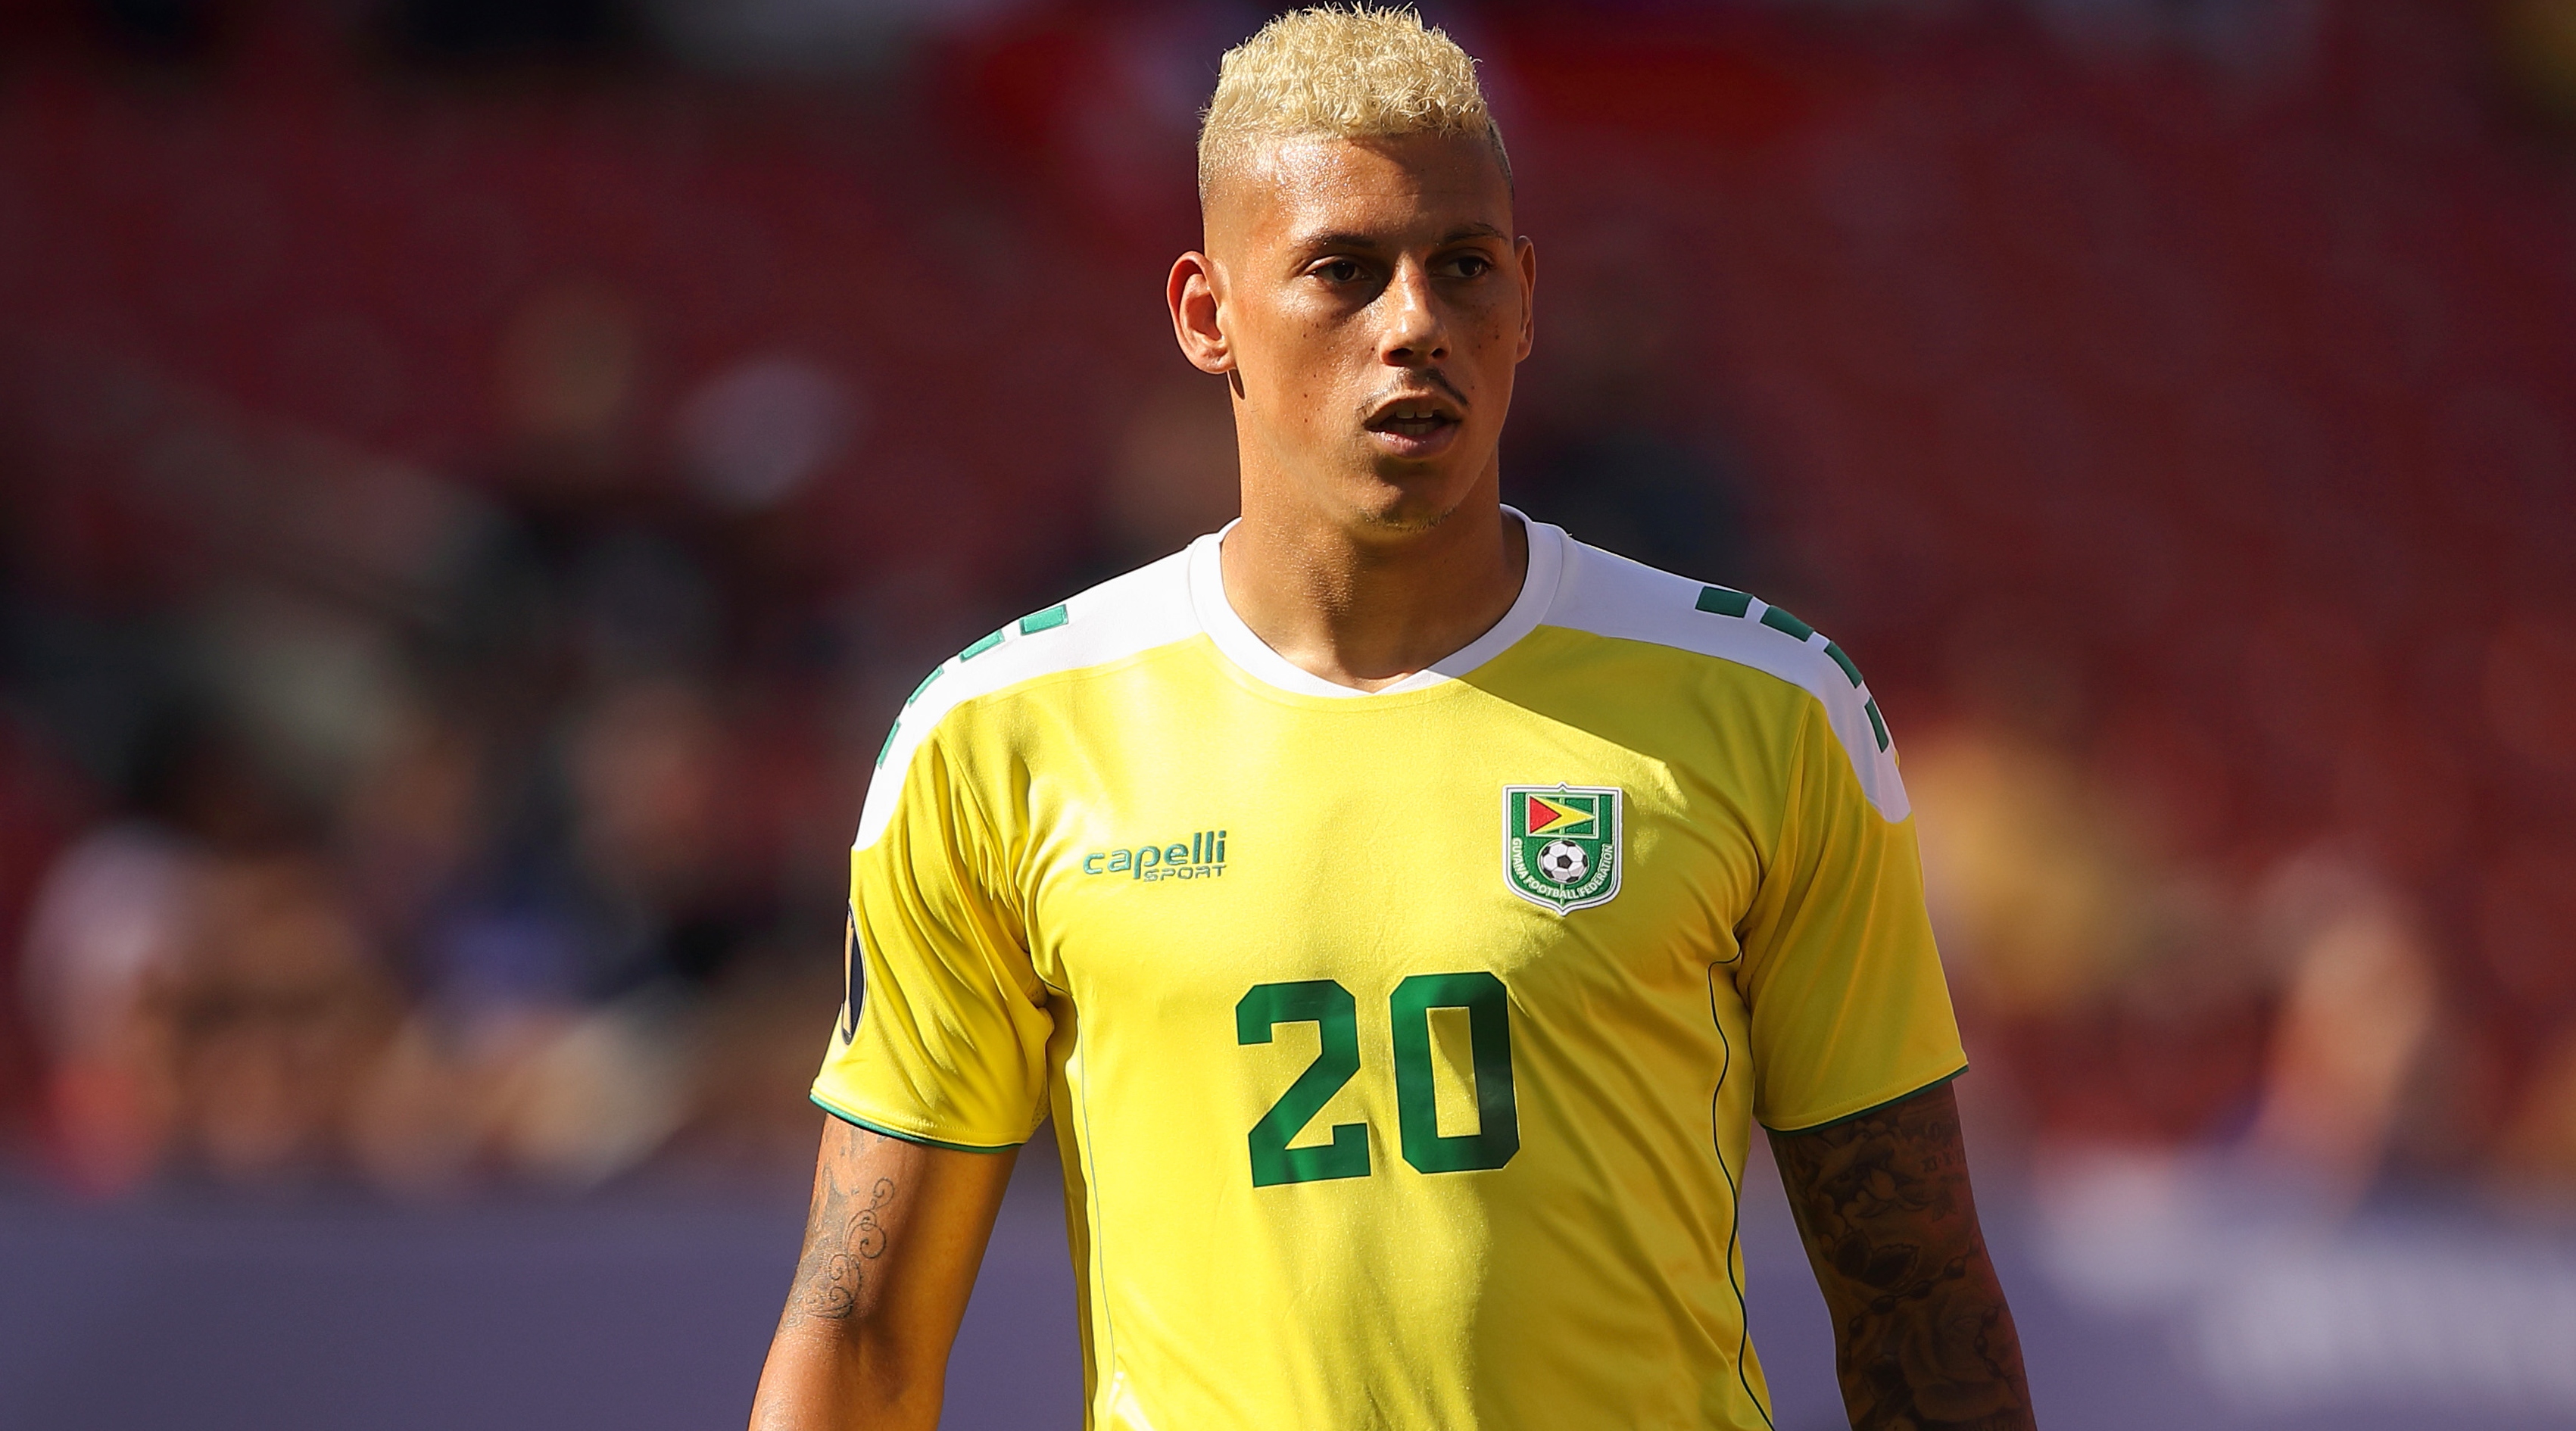 Matthew Briggs of Guyana during the 2019 CONCACAF Gold Cup Group D match between Guyana and Panama at FirstEnergy Stadium on June 22, 2019 in Cleveland, Ohio.